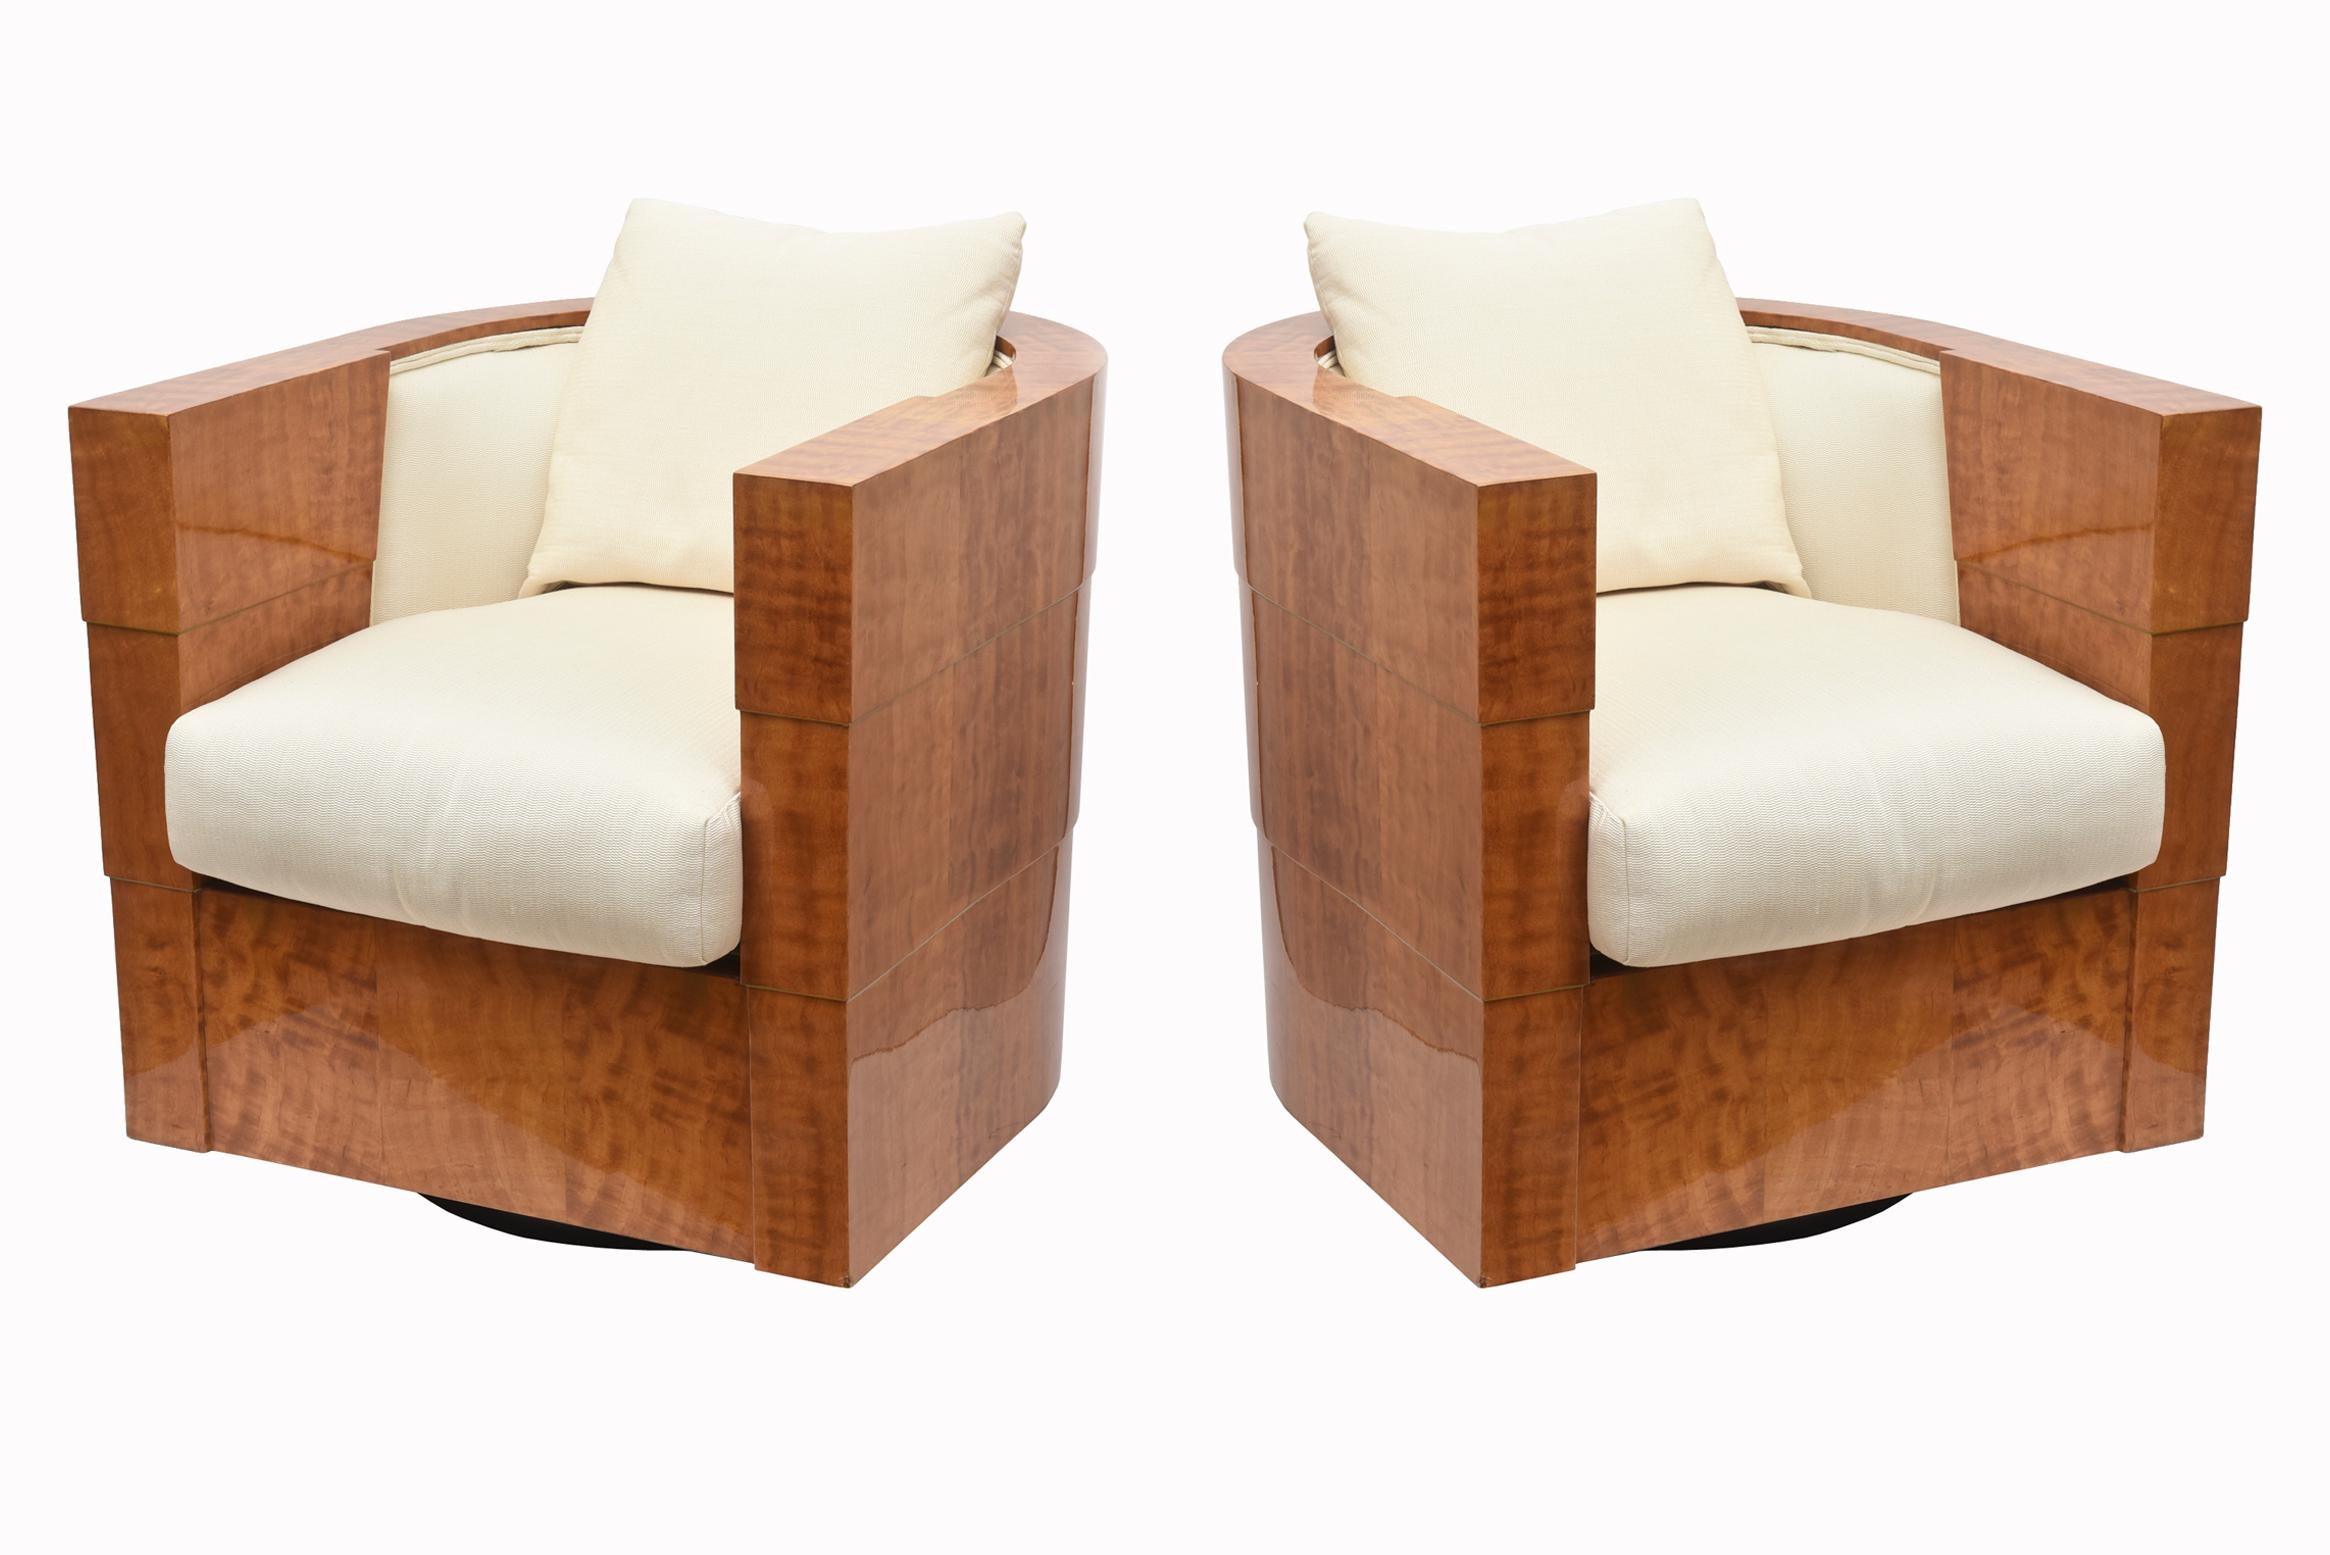 These stunning pair of limited edition swivel Pace club chairs are titled Normandy and were designed by James Rosen of the Rosen Family of the Pace collection. They are made with an exotic veneer finished in high polish lacquer from the South